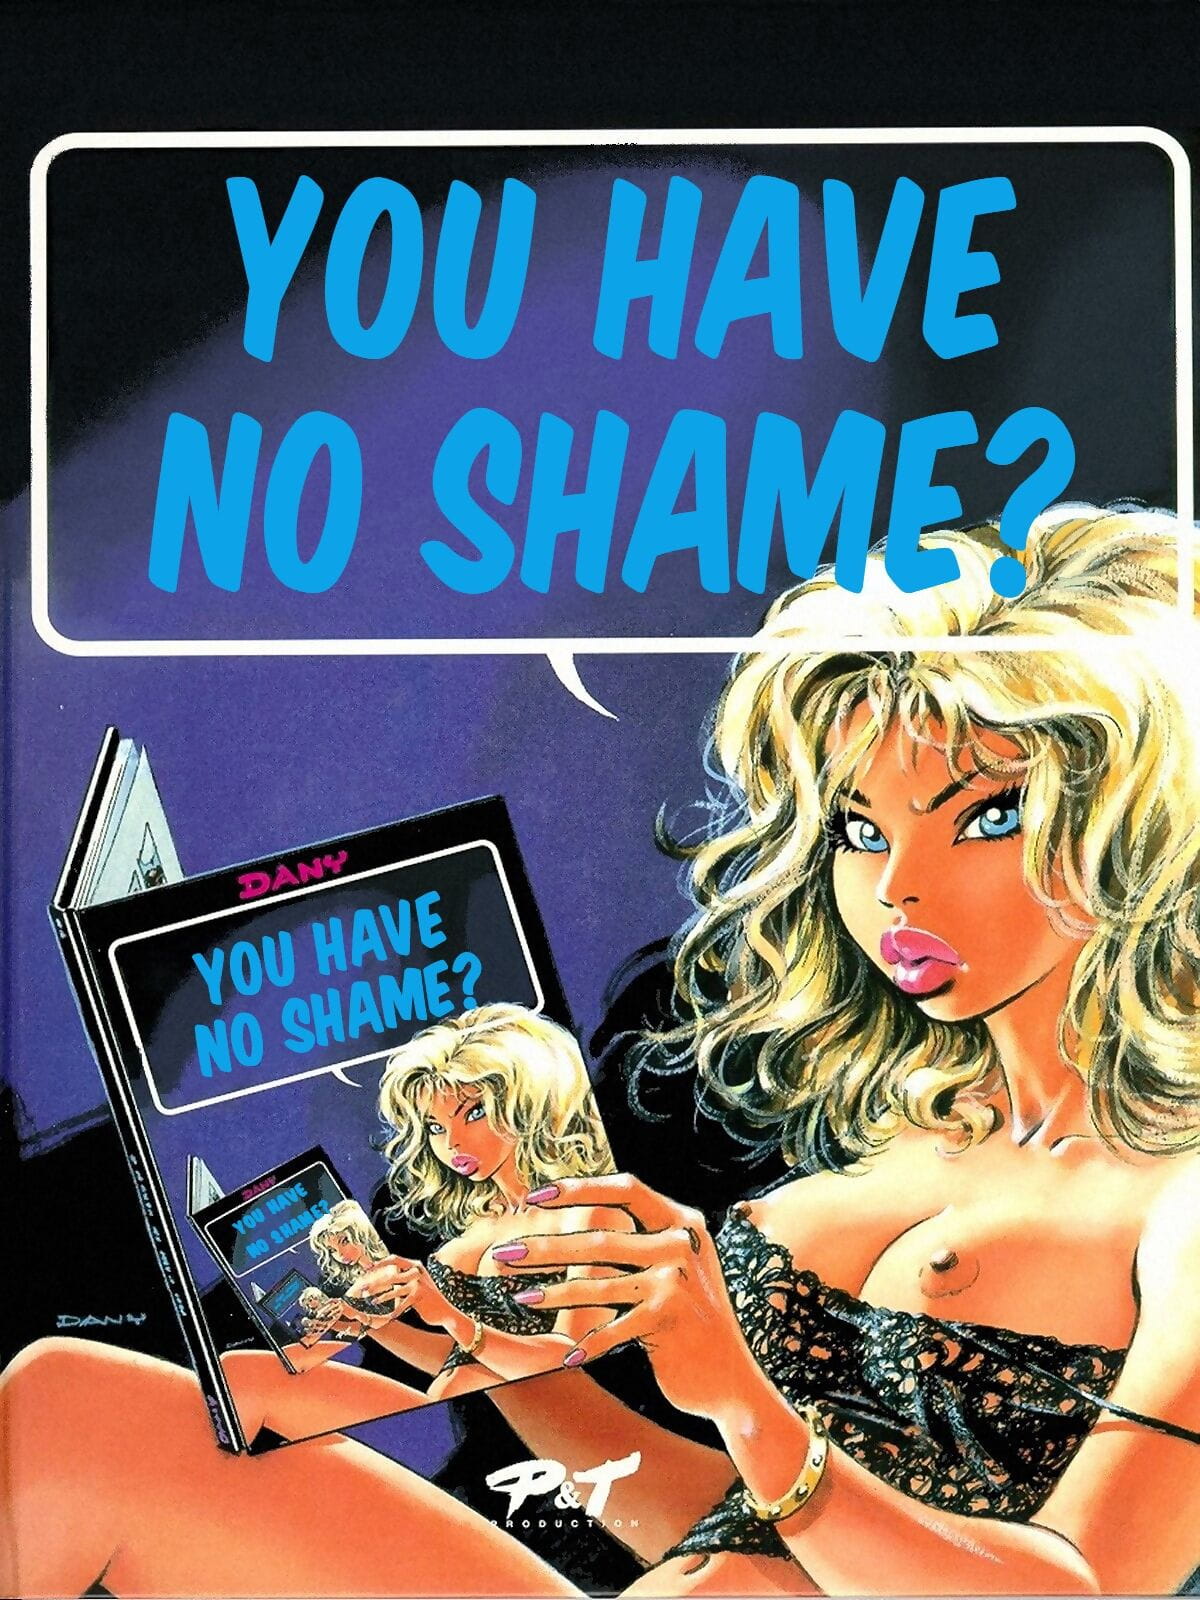 You Have No Shame? page 1